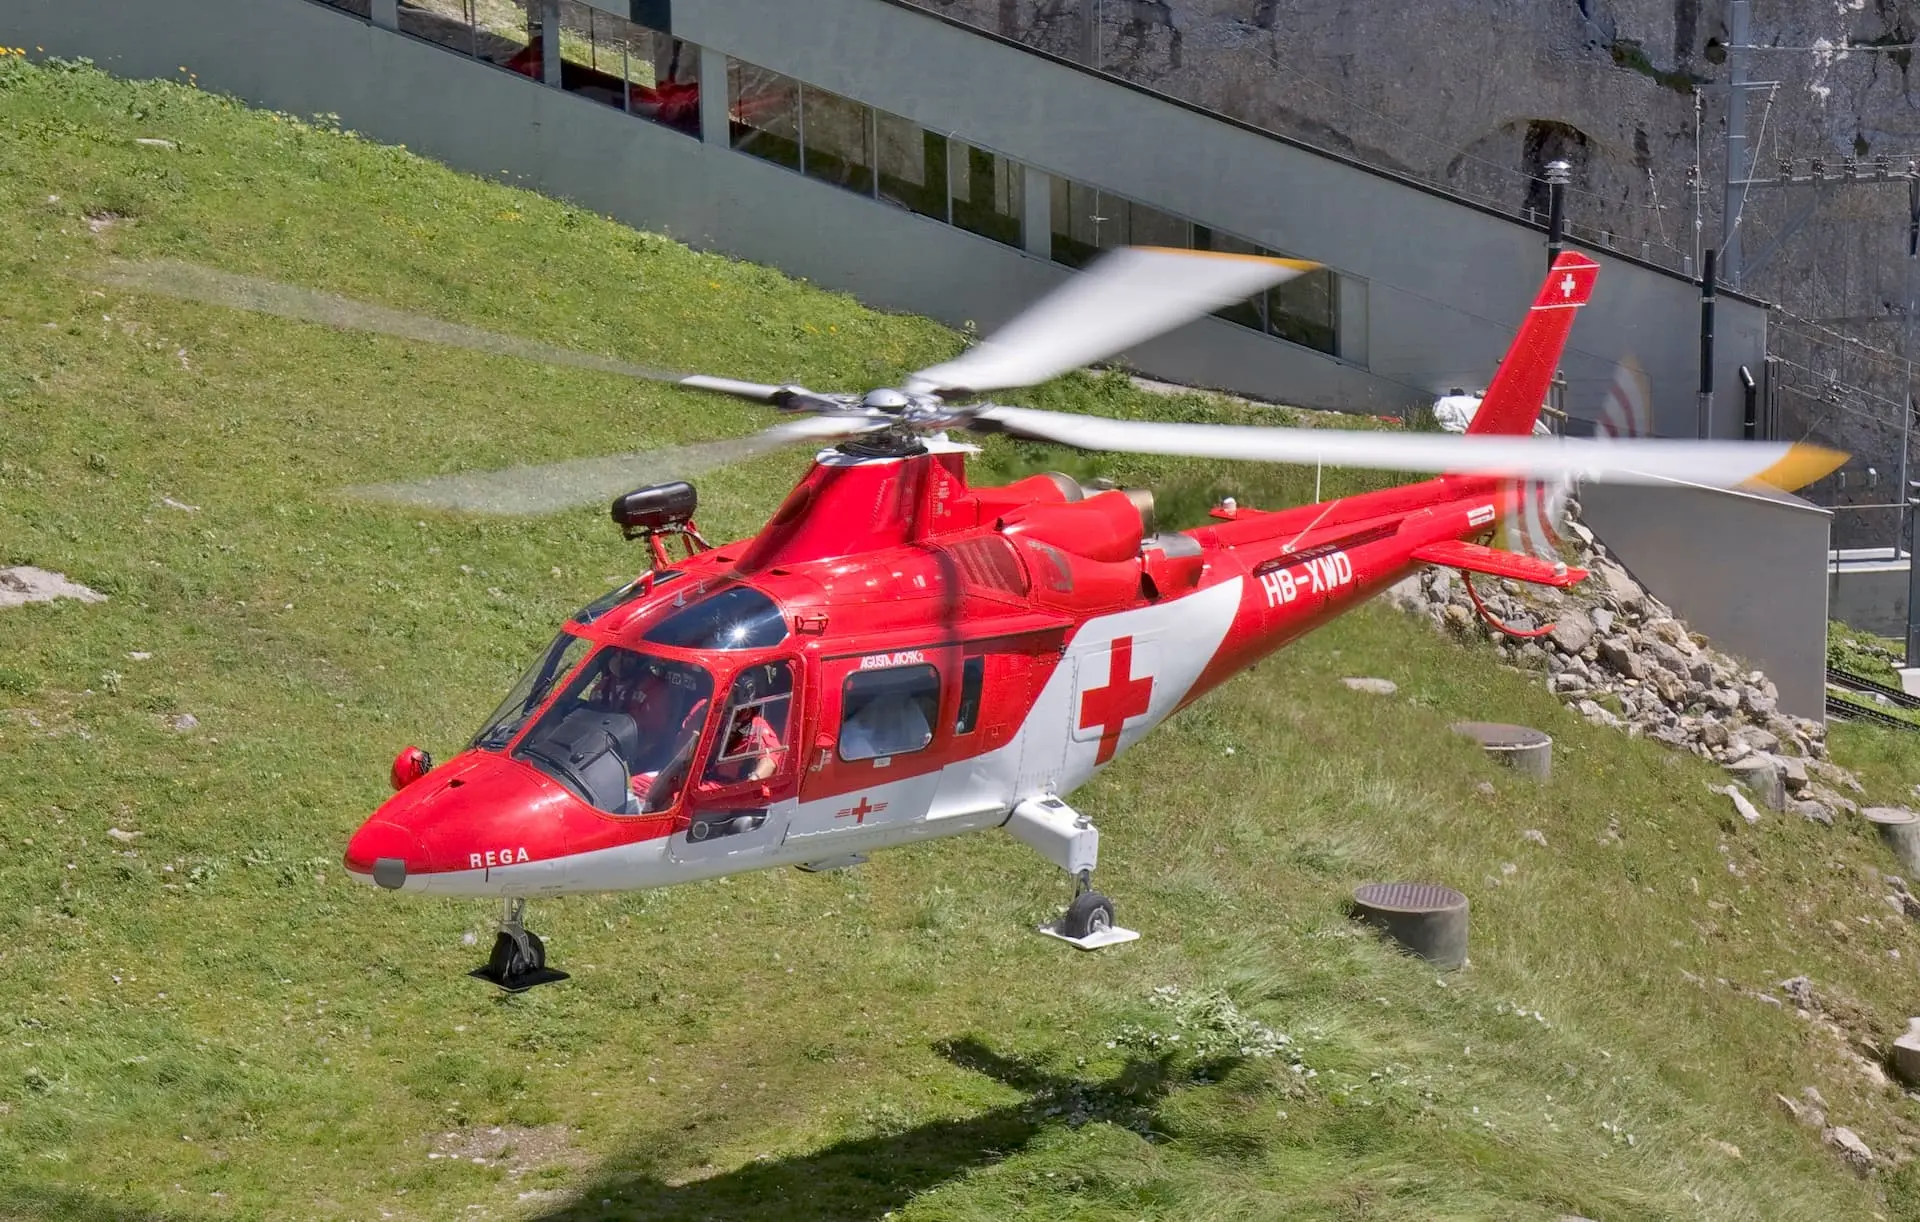 Agusta A109K2 leaves mount Pilatus after having recovered a patient